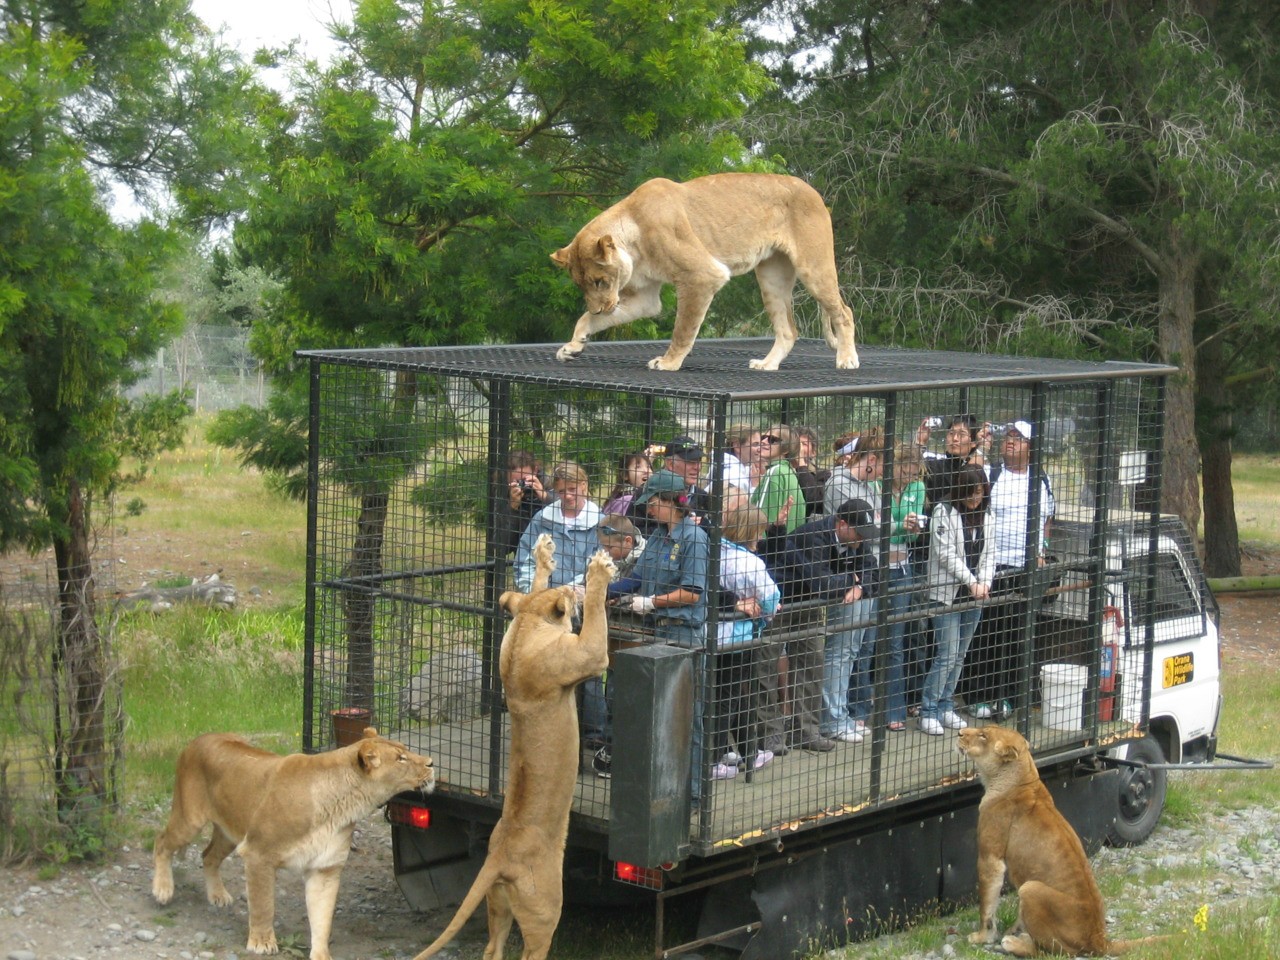 The correct way to build a Zoo.